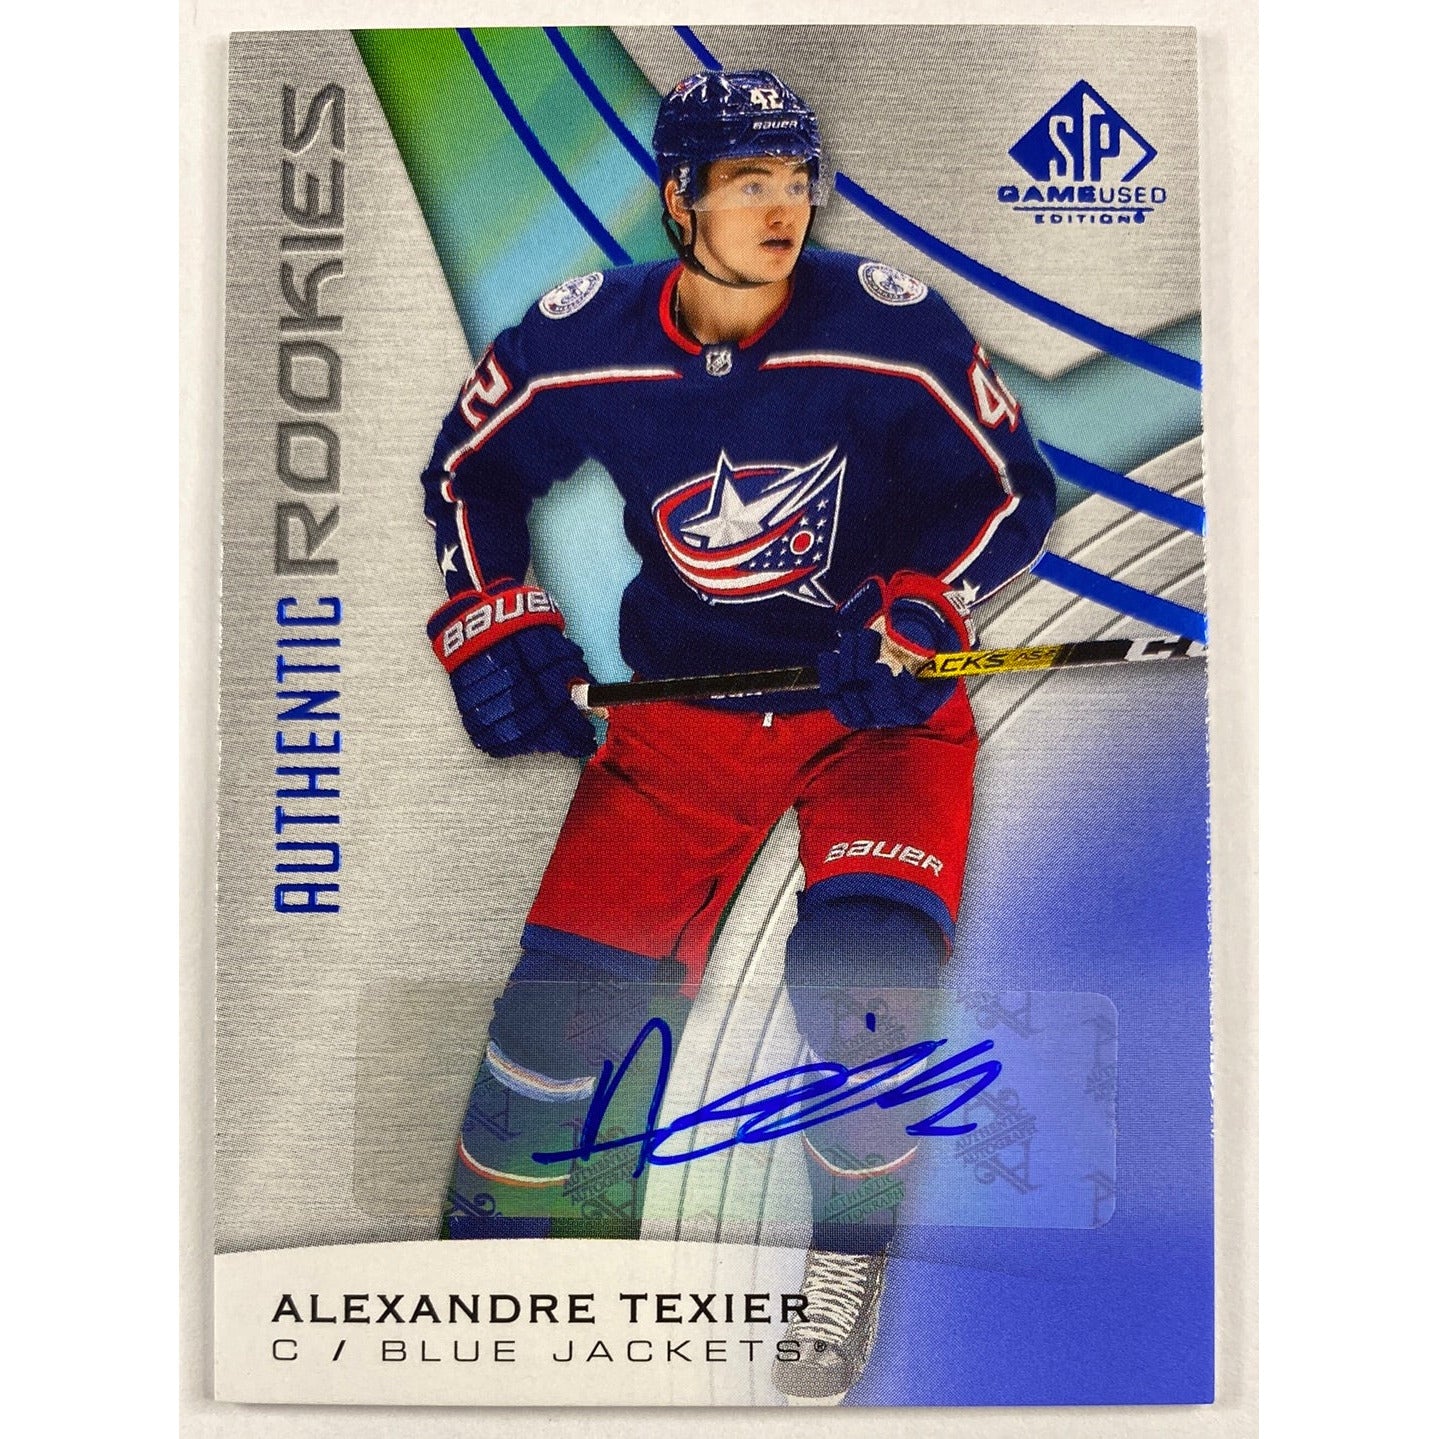 2019-20 SP Game Used Alexander Texier Authentic Rookies Auto